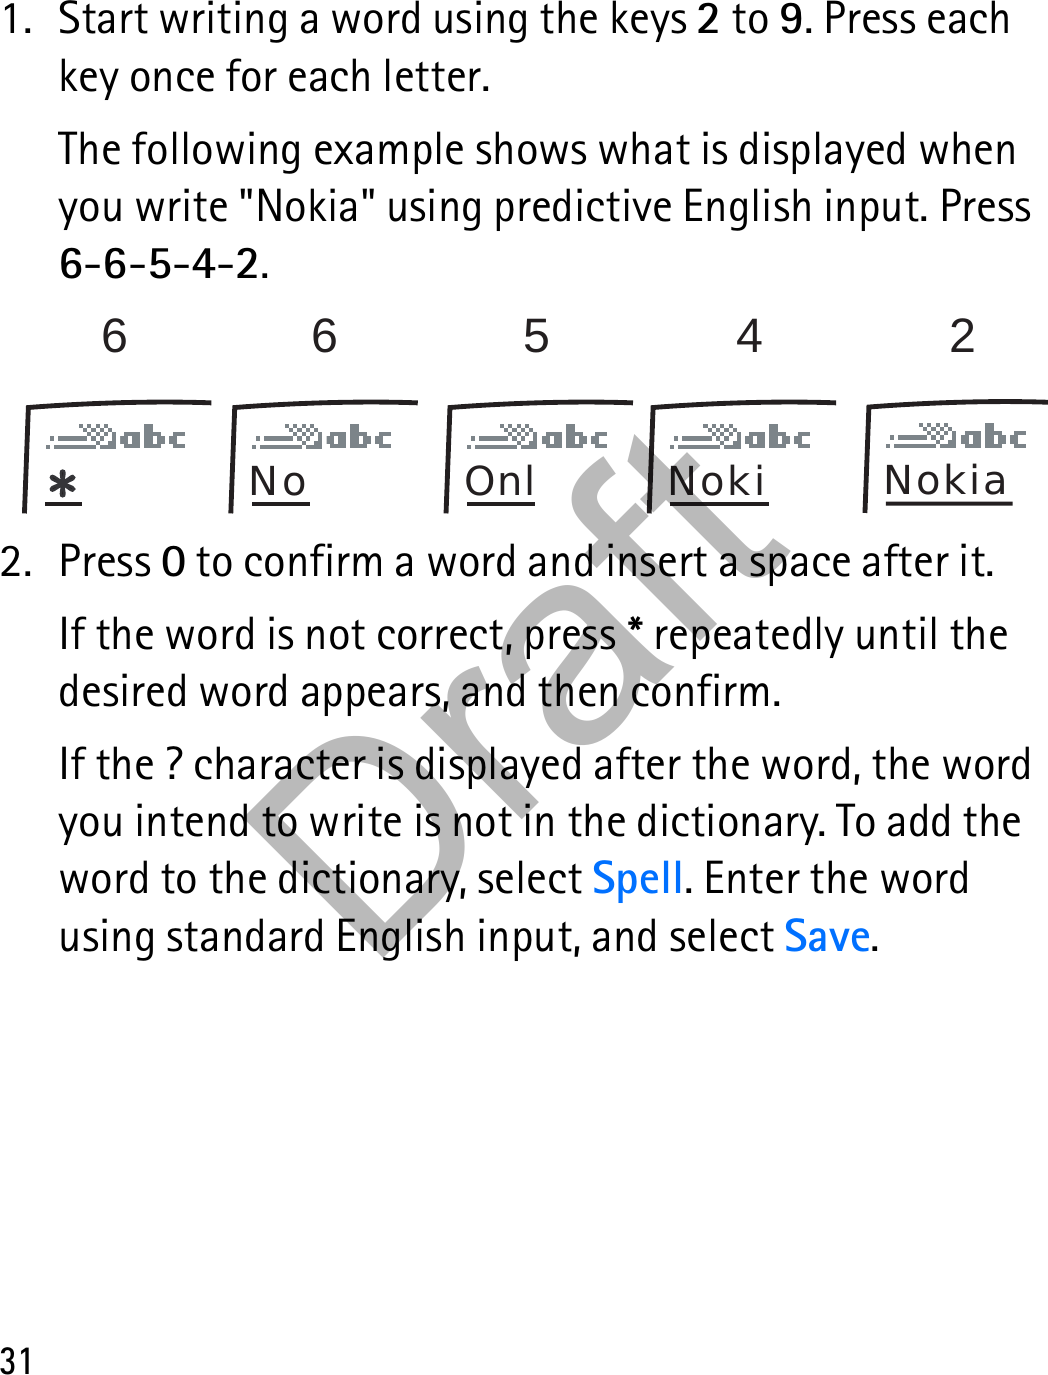 311. Start writing a word using the keys 2 to 9. Press each key once for each letter.The following example shows what is displayed when you write &quot;Nokia&quot; using predictive English input. Press 6-6-5-4-2.2. Press 0 to confirm a word and insert a space after it.If the word is not correct, press * repeatedly until the desired word appears, and then confirm.If the ? character is displayed after the word, the word you intend to write is not in the dictionary. To add the word to the dictionary, select Spell. Enter the word using standard English input, and select Save.66542No Onl Noki NokiaDraft